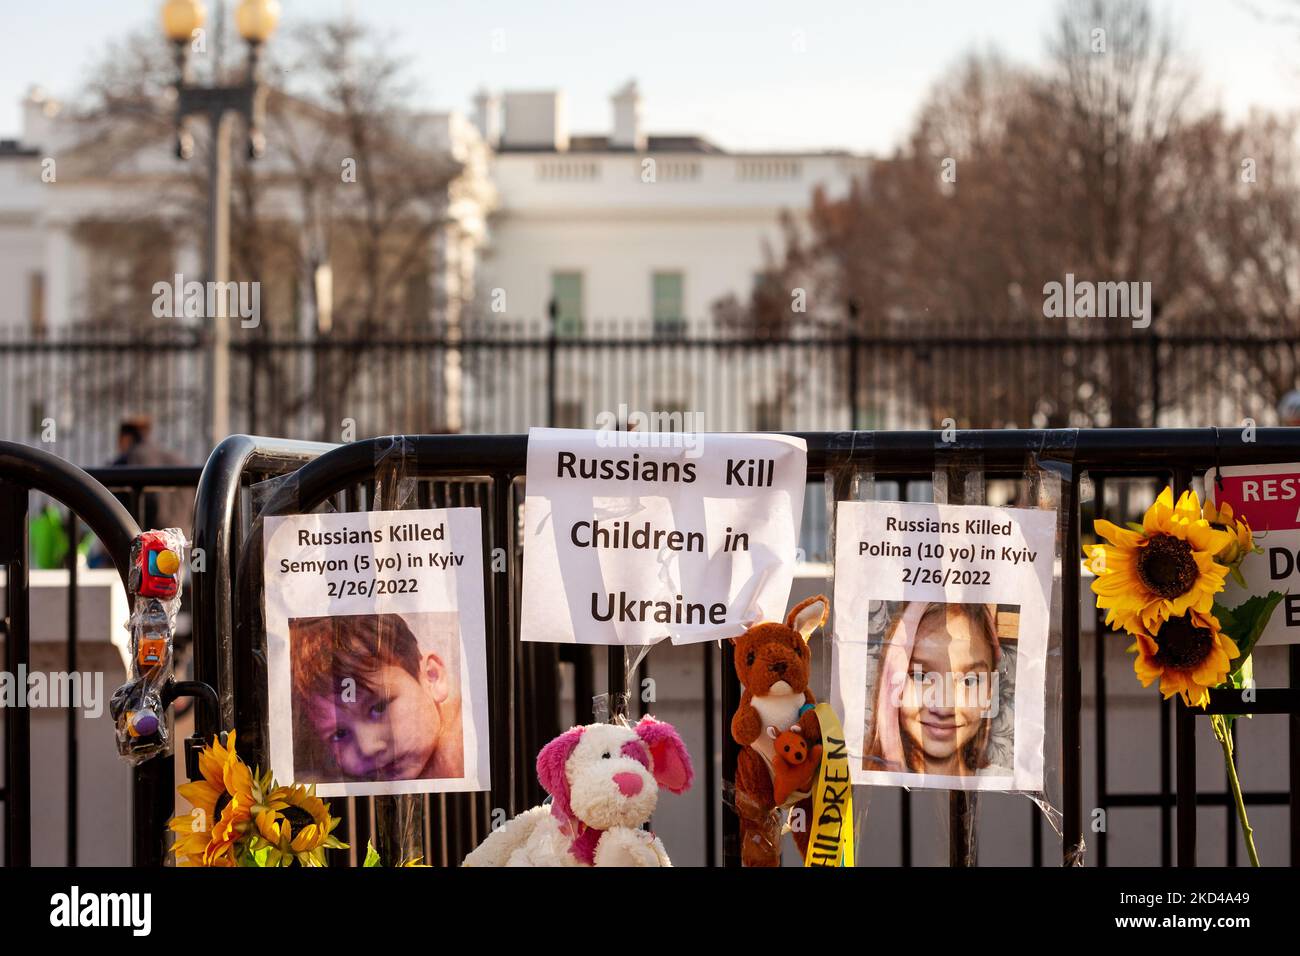 Photos of children killed in Ukraine hang on a fence during a rally White House. This is reminiscent of how the now-famous Black Lives Memorial Fence began. Hundreds of people gathered to demand a NATO no-fly zone and military assistance for Ukraine. This is the 10th consecutive day of demonstrations at the White House for Ukraine. (Photo by Allison Bailey/NurPhoto) Stock Photo